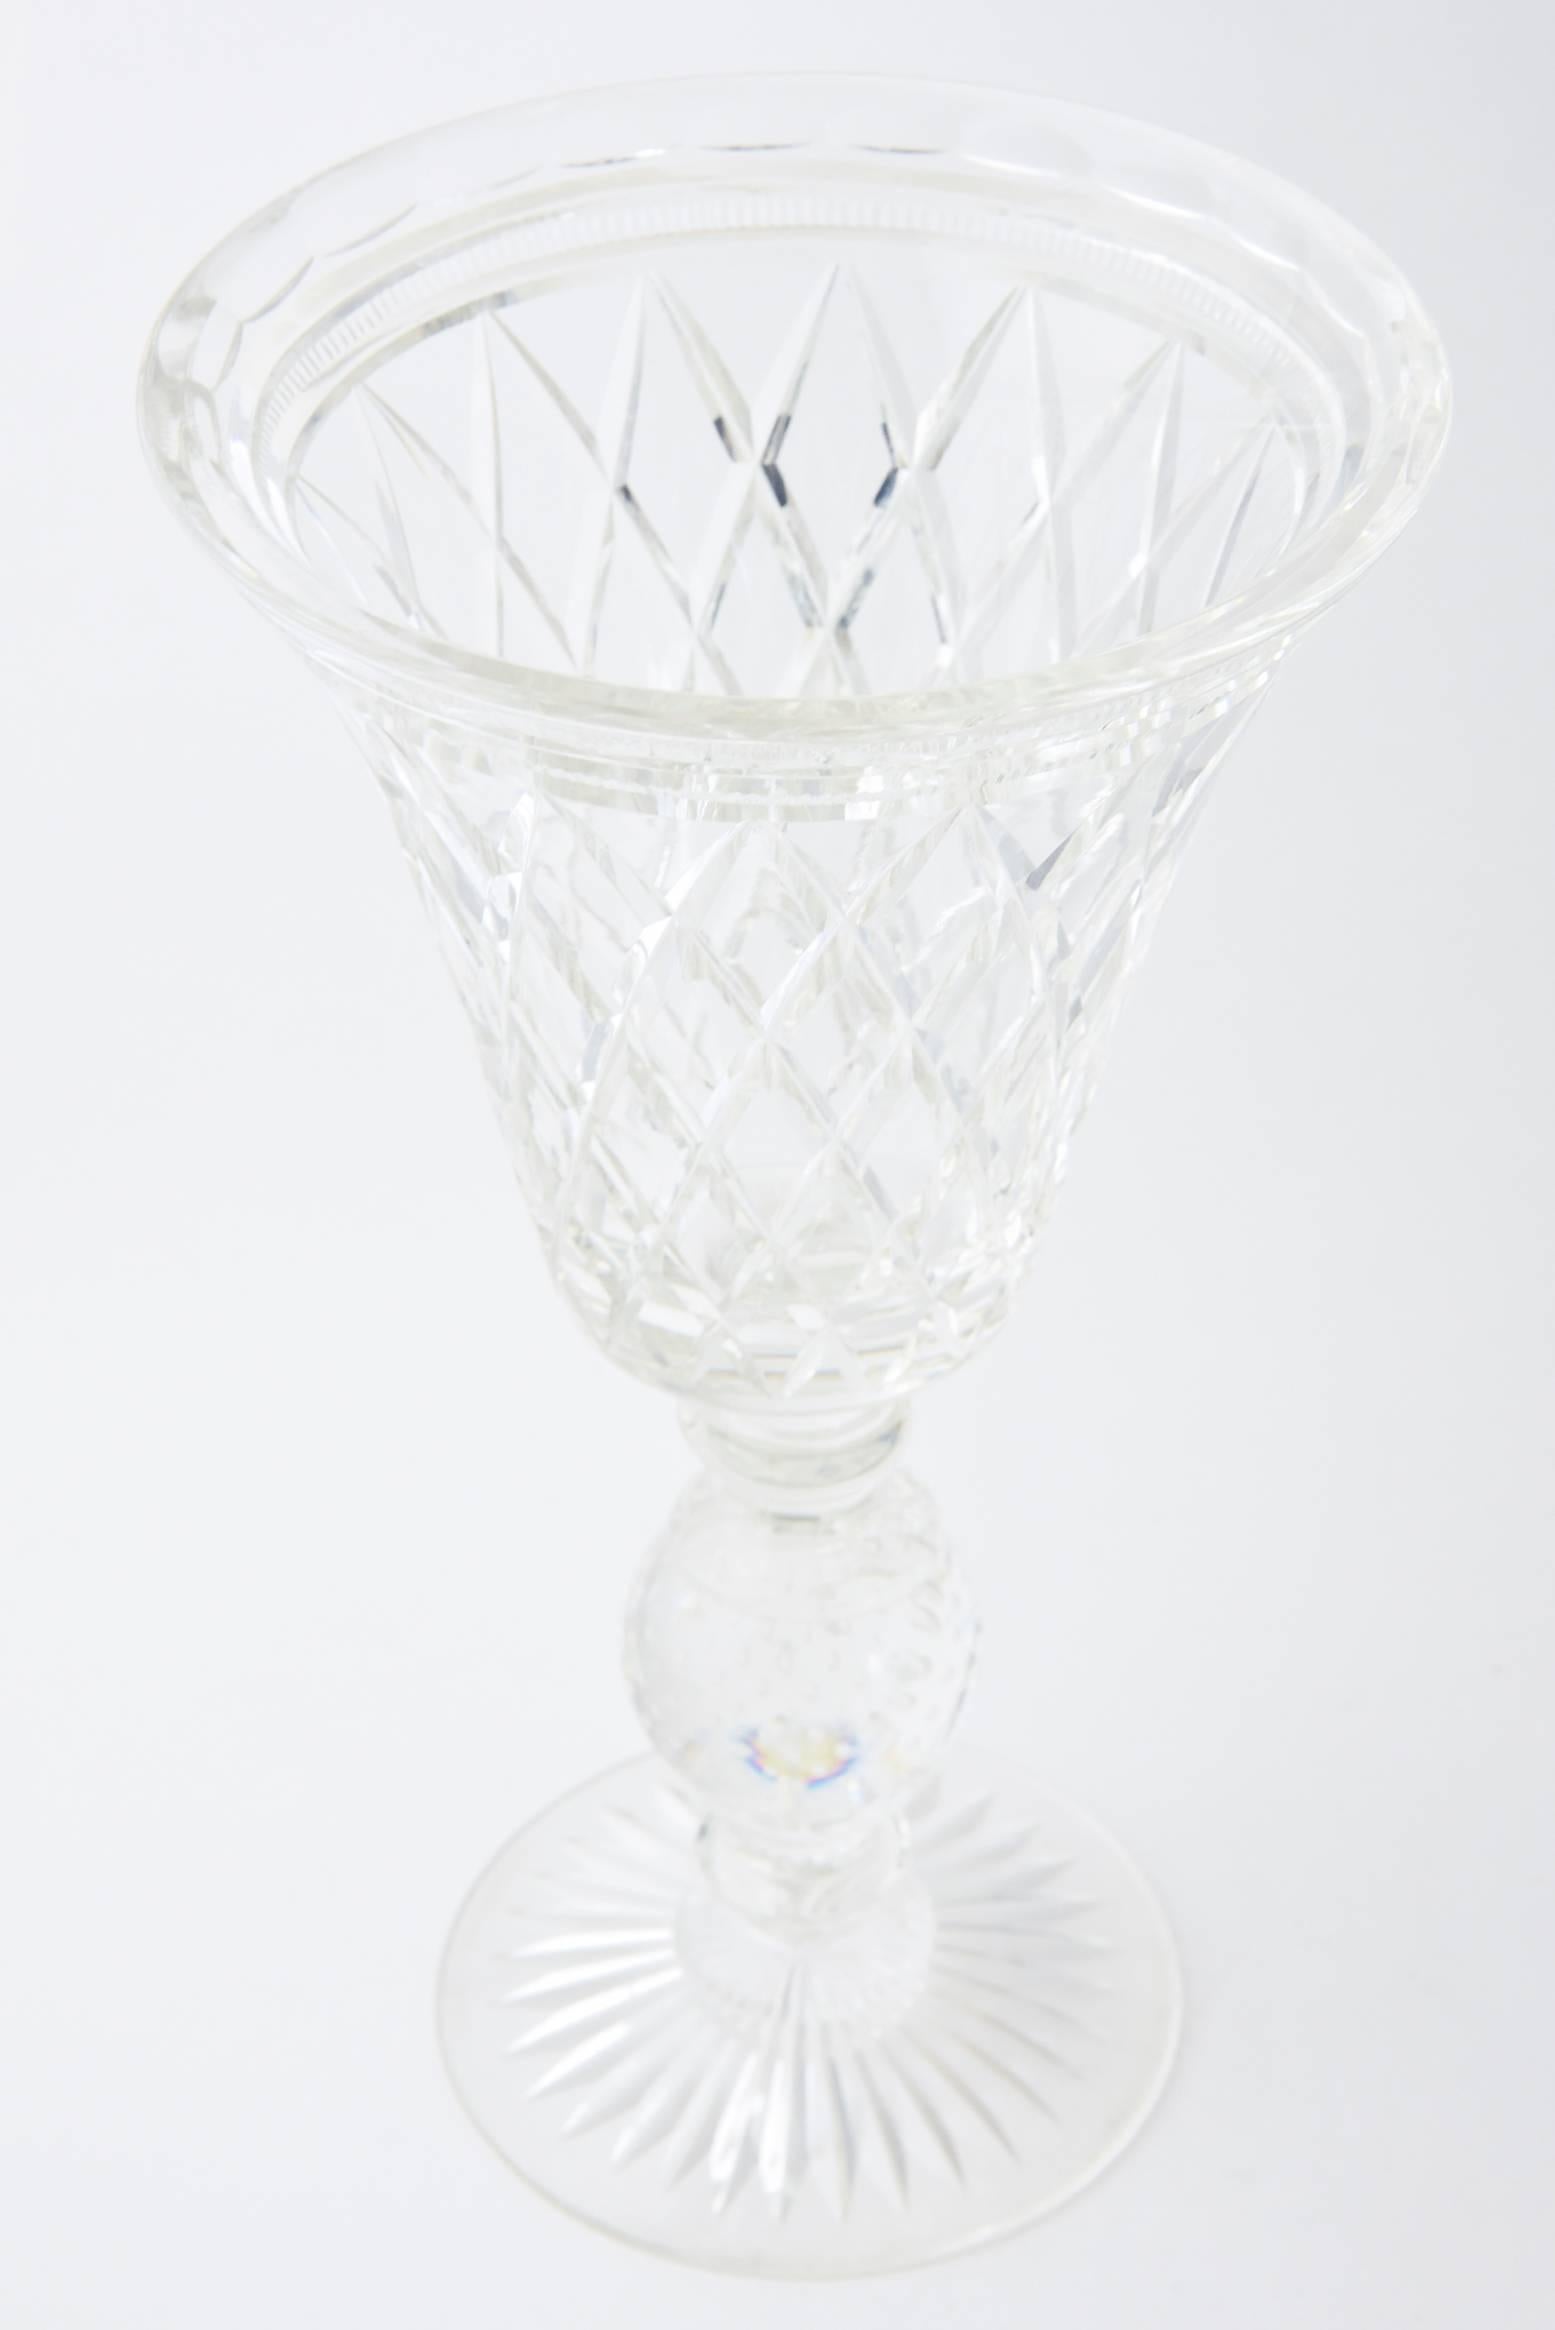 Other Large Mid 20th Century Chalice Shaped Cut-Glass Pairpoint Vase For Sale